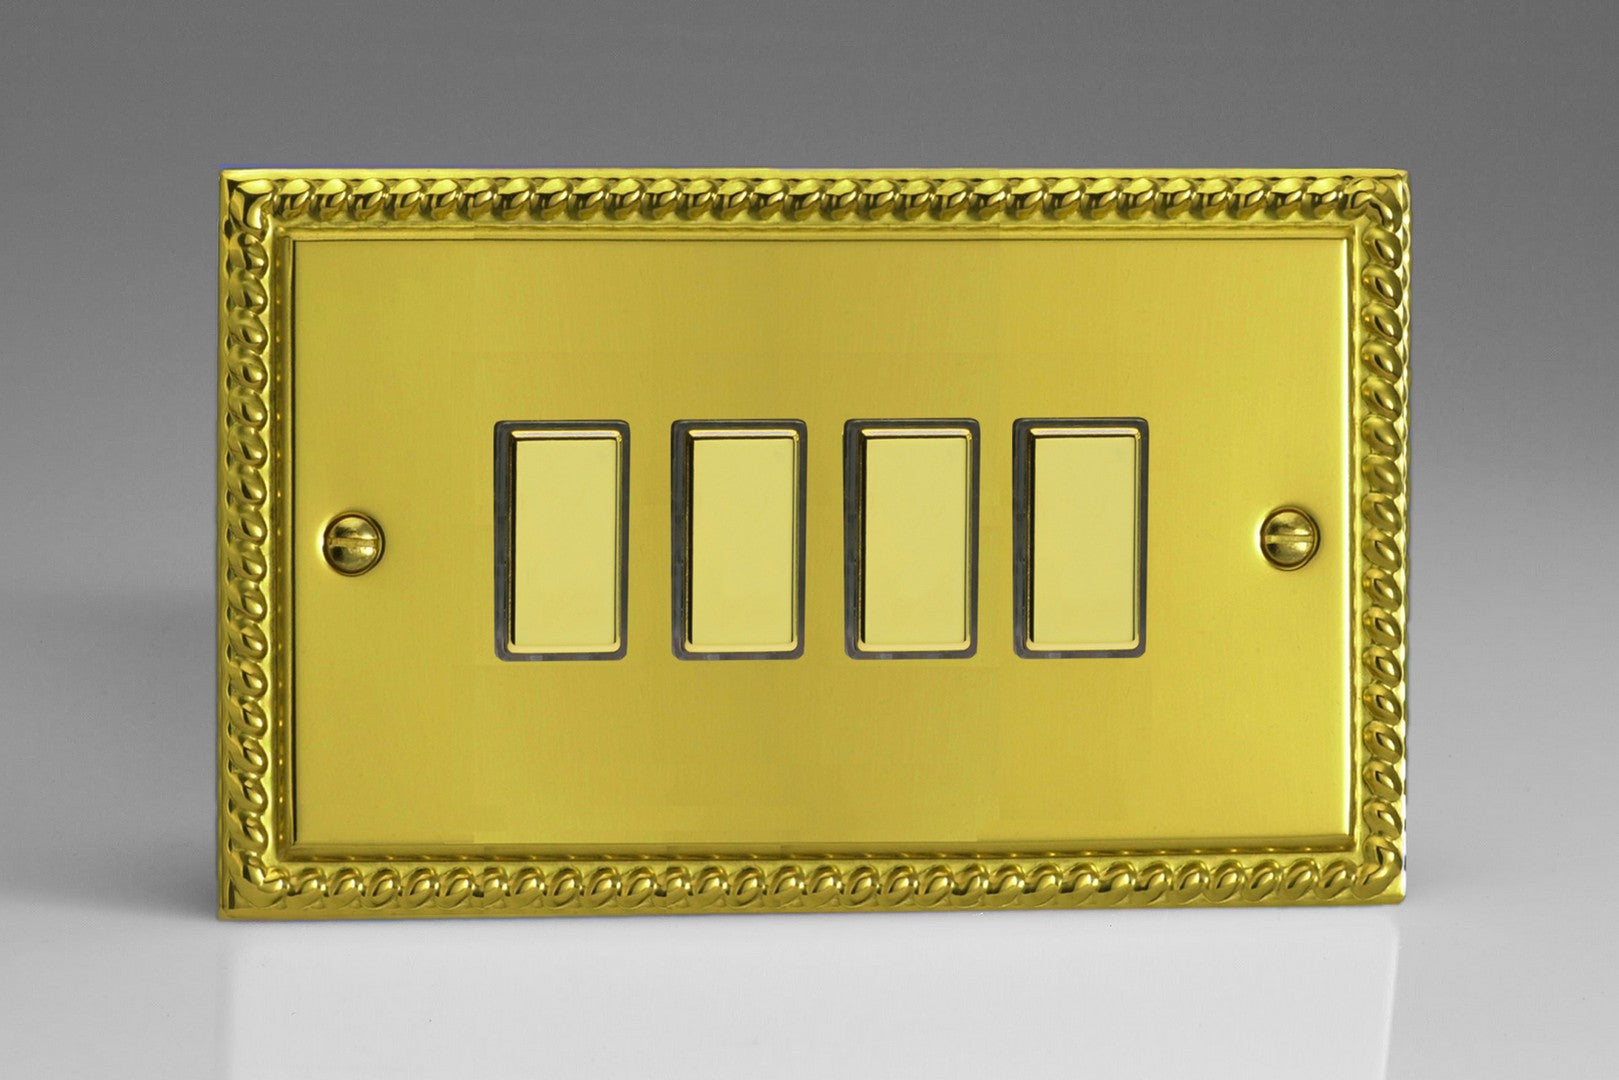 Varilight JGES004 Classic Georgian Brass 4-Gang Tactile Touch Control Dimming Slave for use with Multi-Point Touch or Remote Master on 2-Way Circuits (Twin Plate)